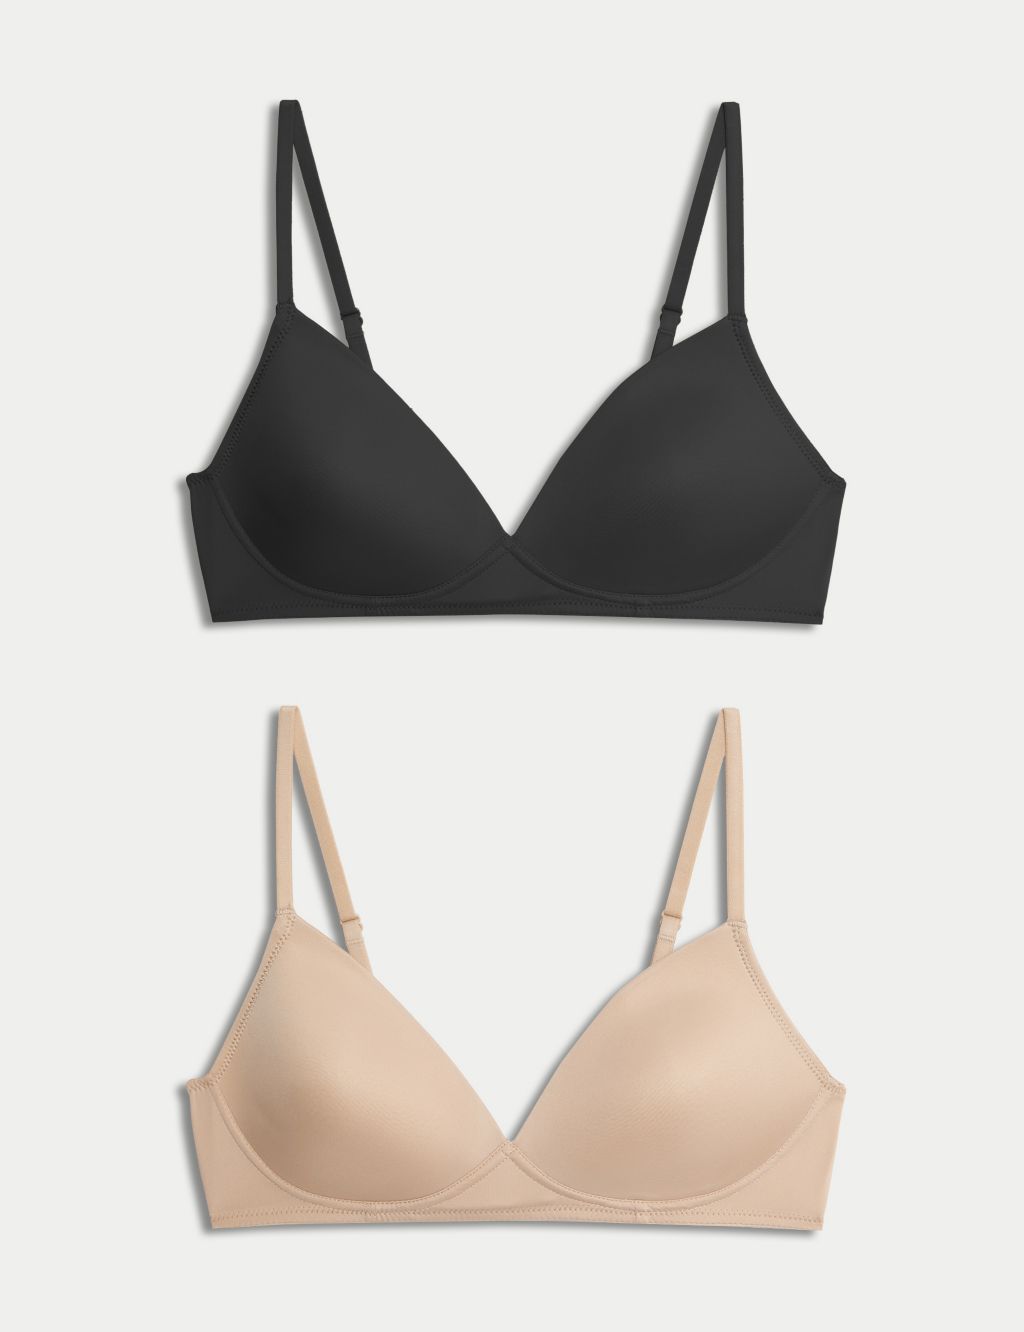 Best Boob Job Bra Size 34a for sale in Cornwall for 2024